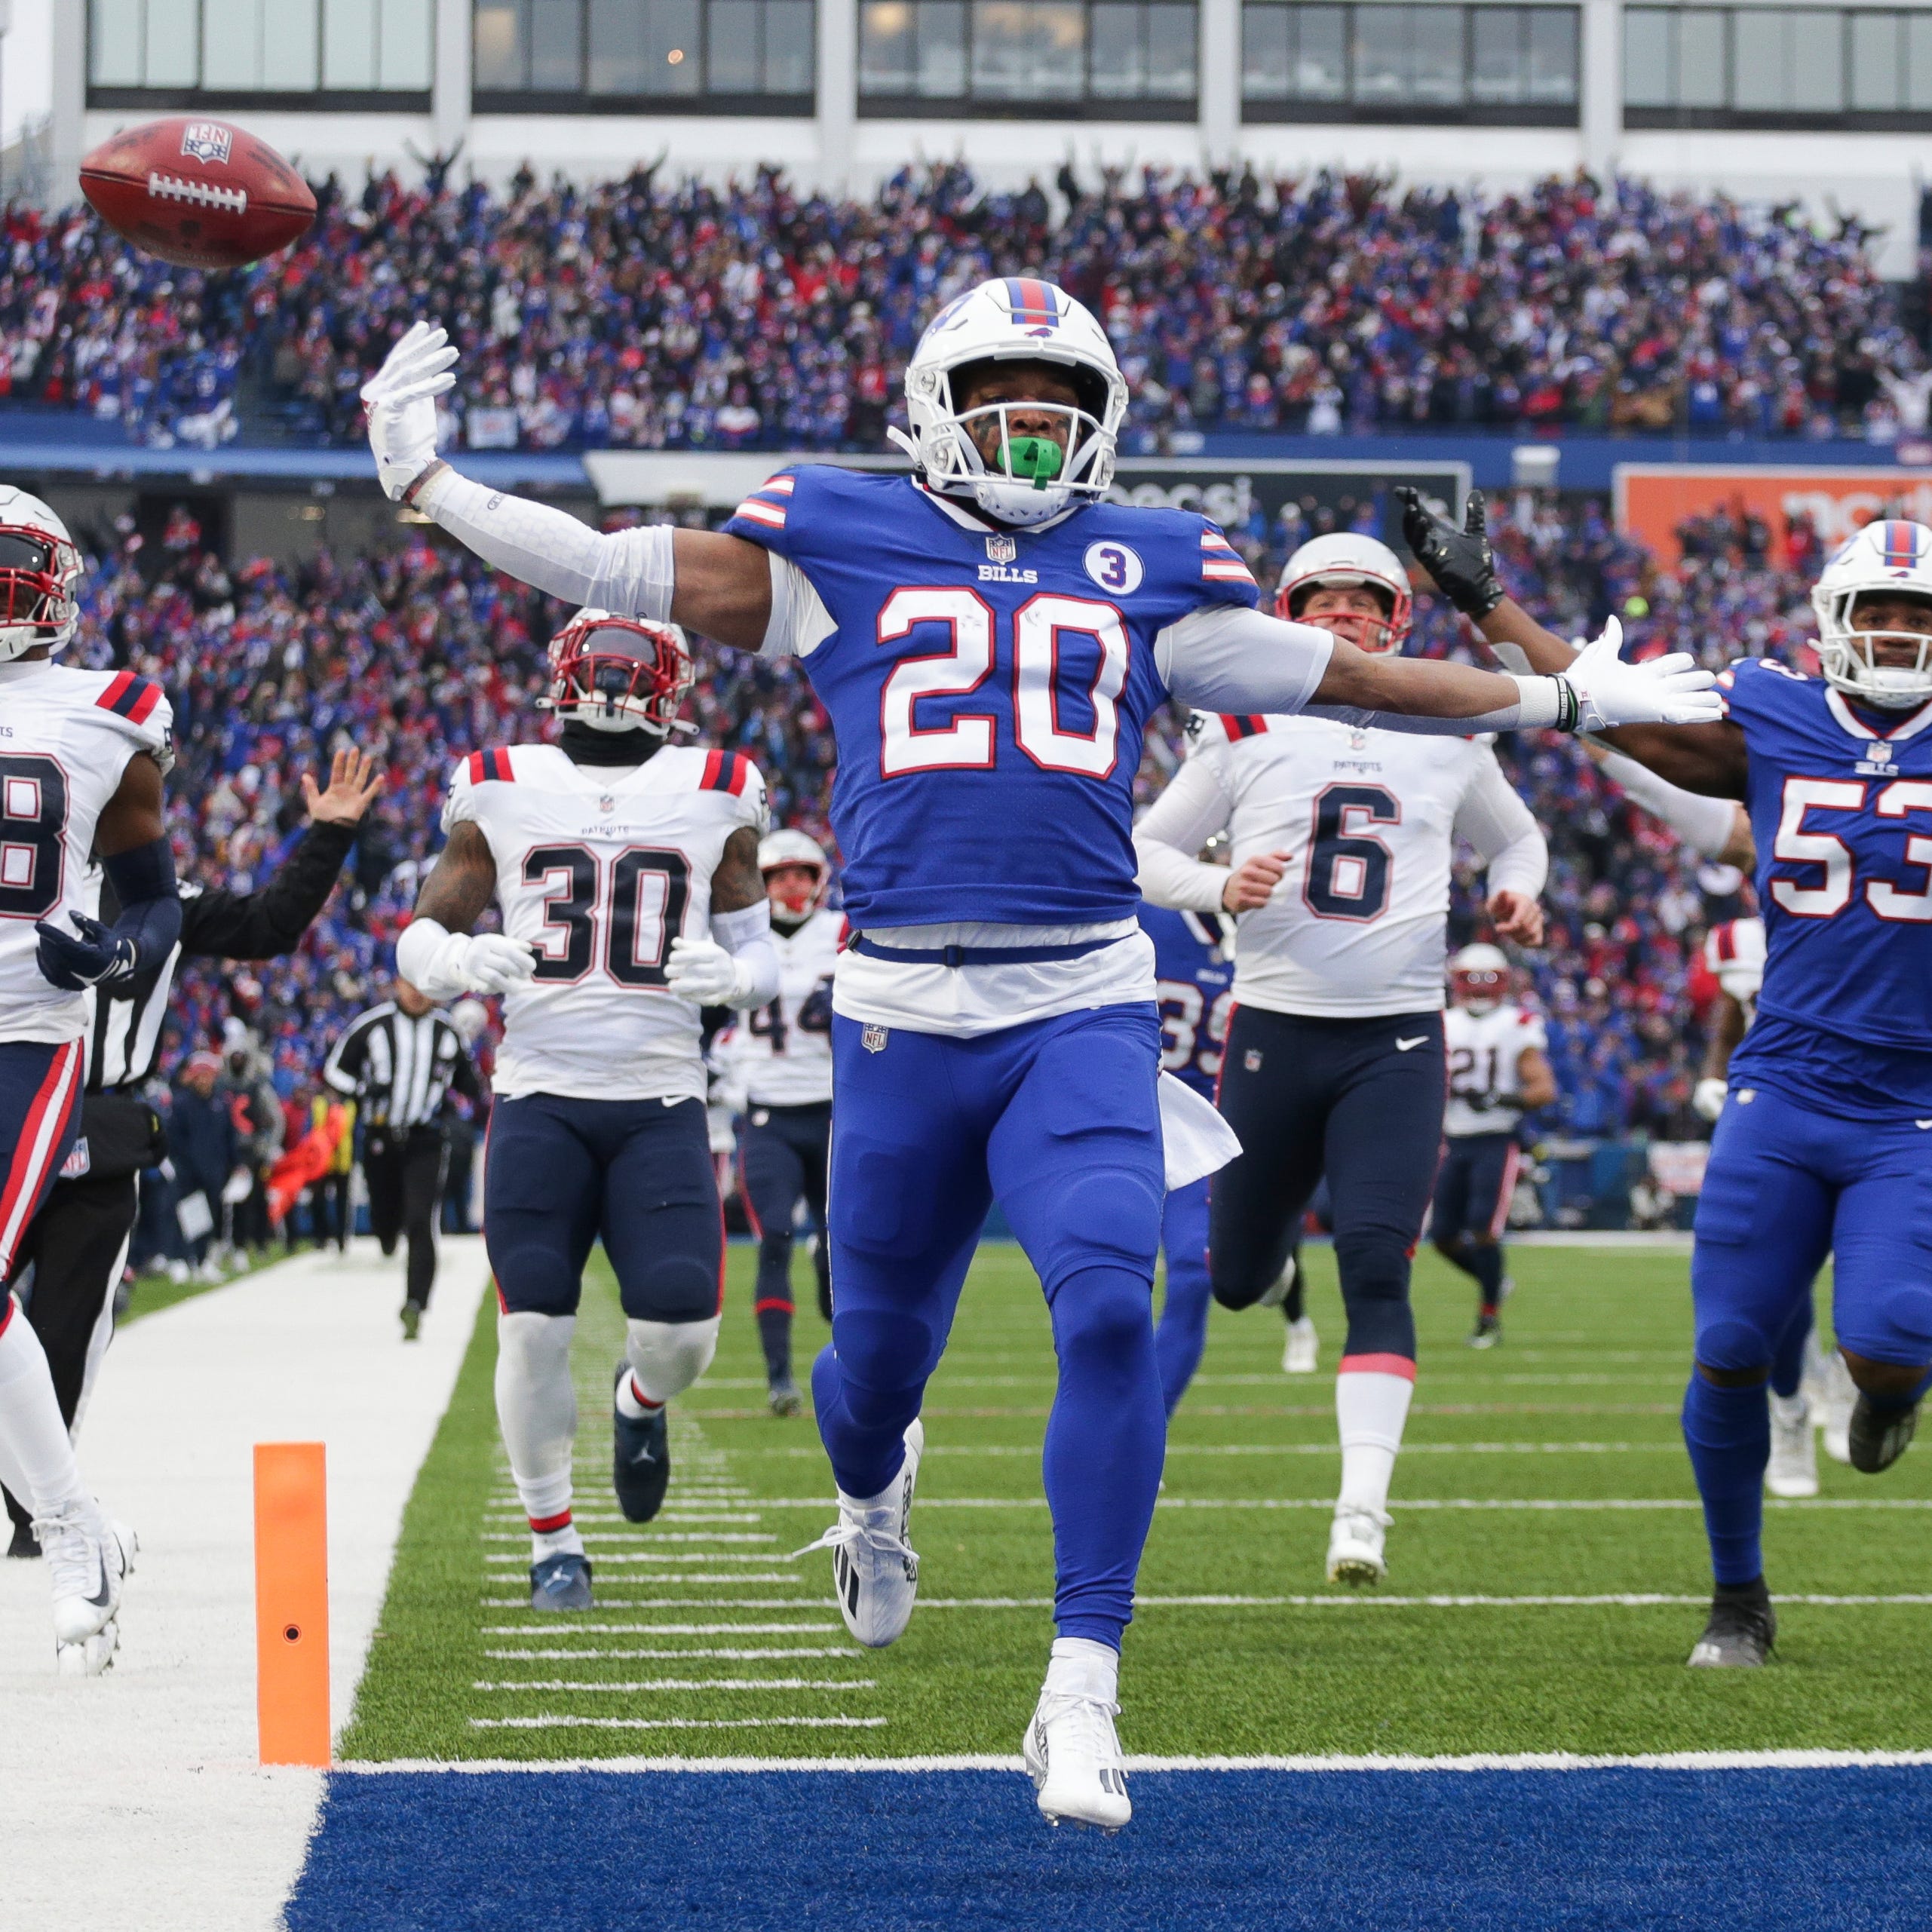 Buffalo Bills running back Nyheim Hines (20) scores a touchdown on a kickoff return during the first half of an NFL football game against the New England Patriots on Sunday, Jan. 8, 2023, in Orchard Park, N.Y.